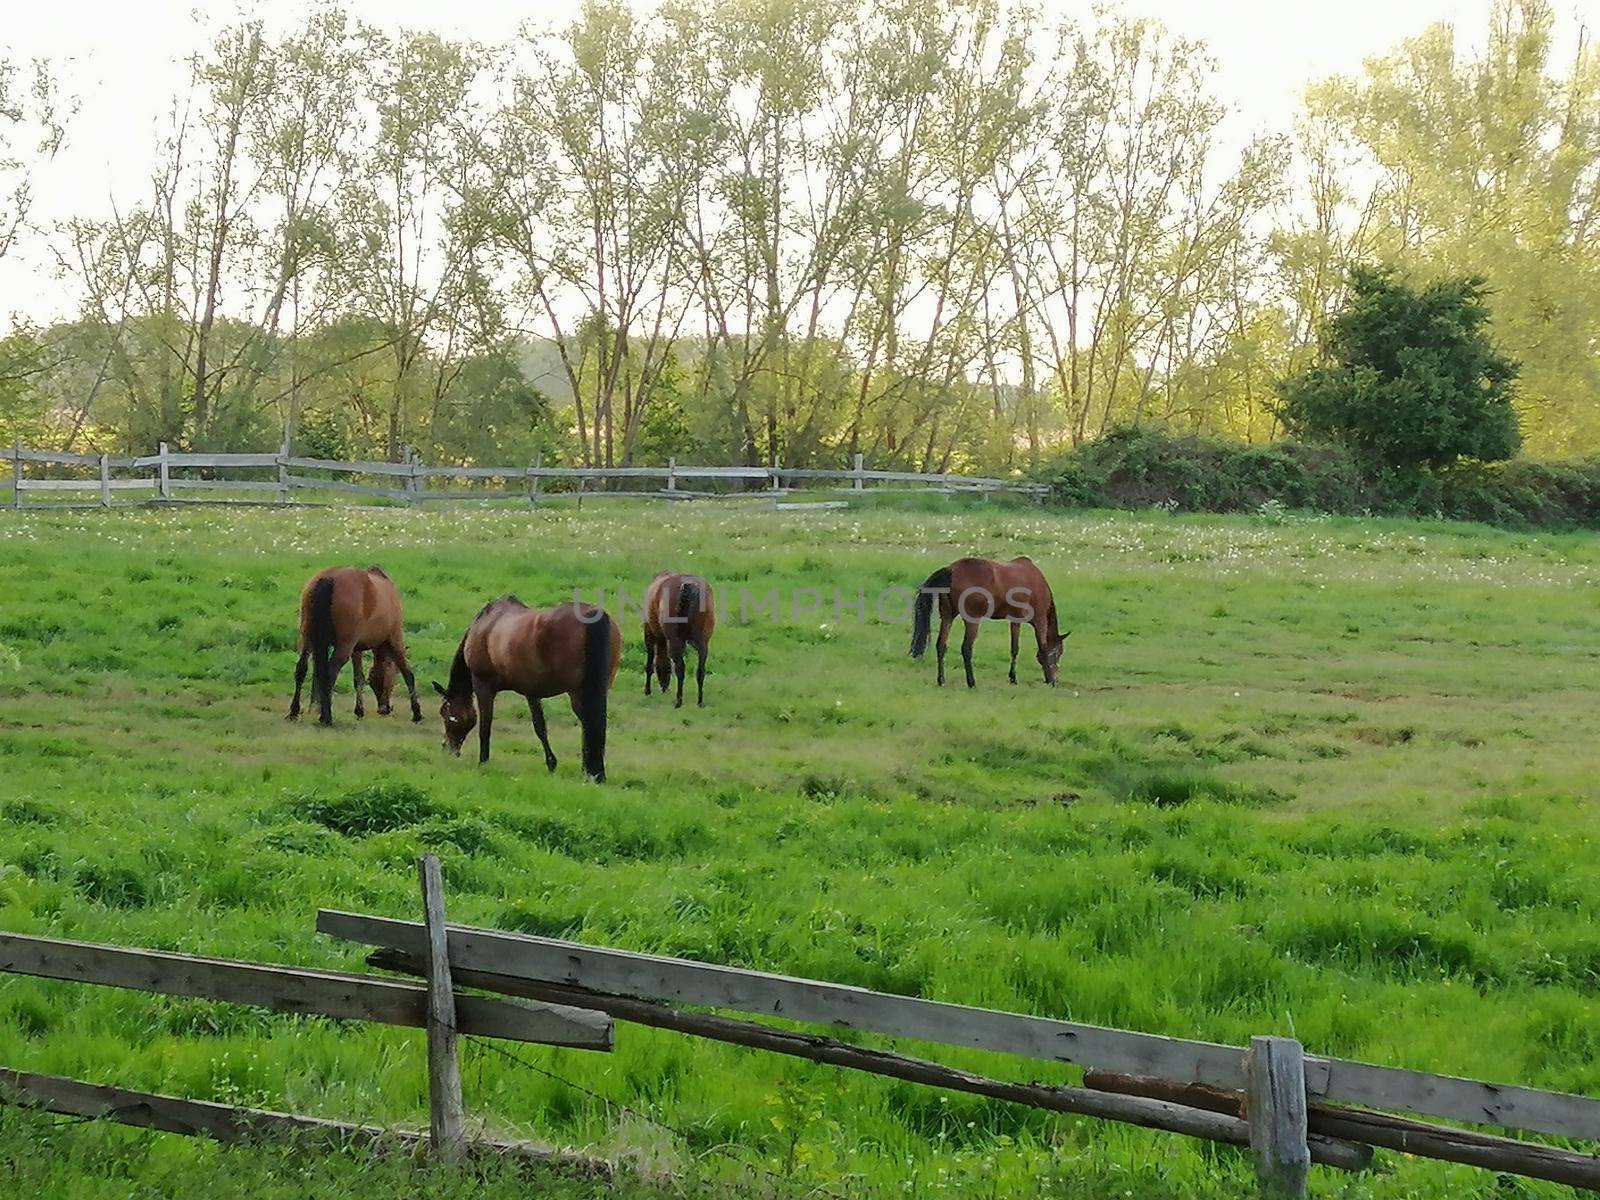 Horses in a grassy field on a bright and sunny day in Germany.